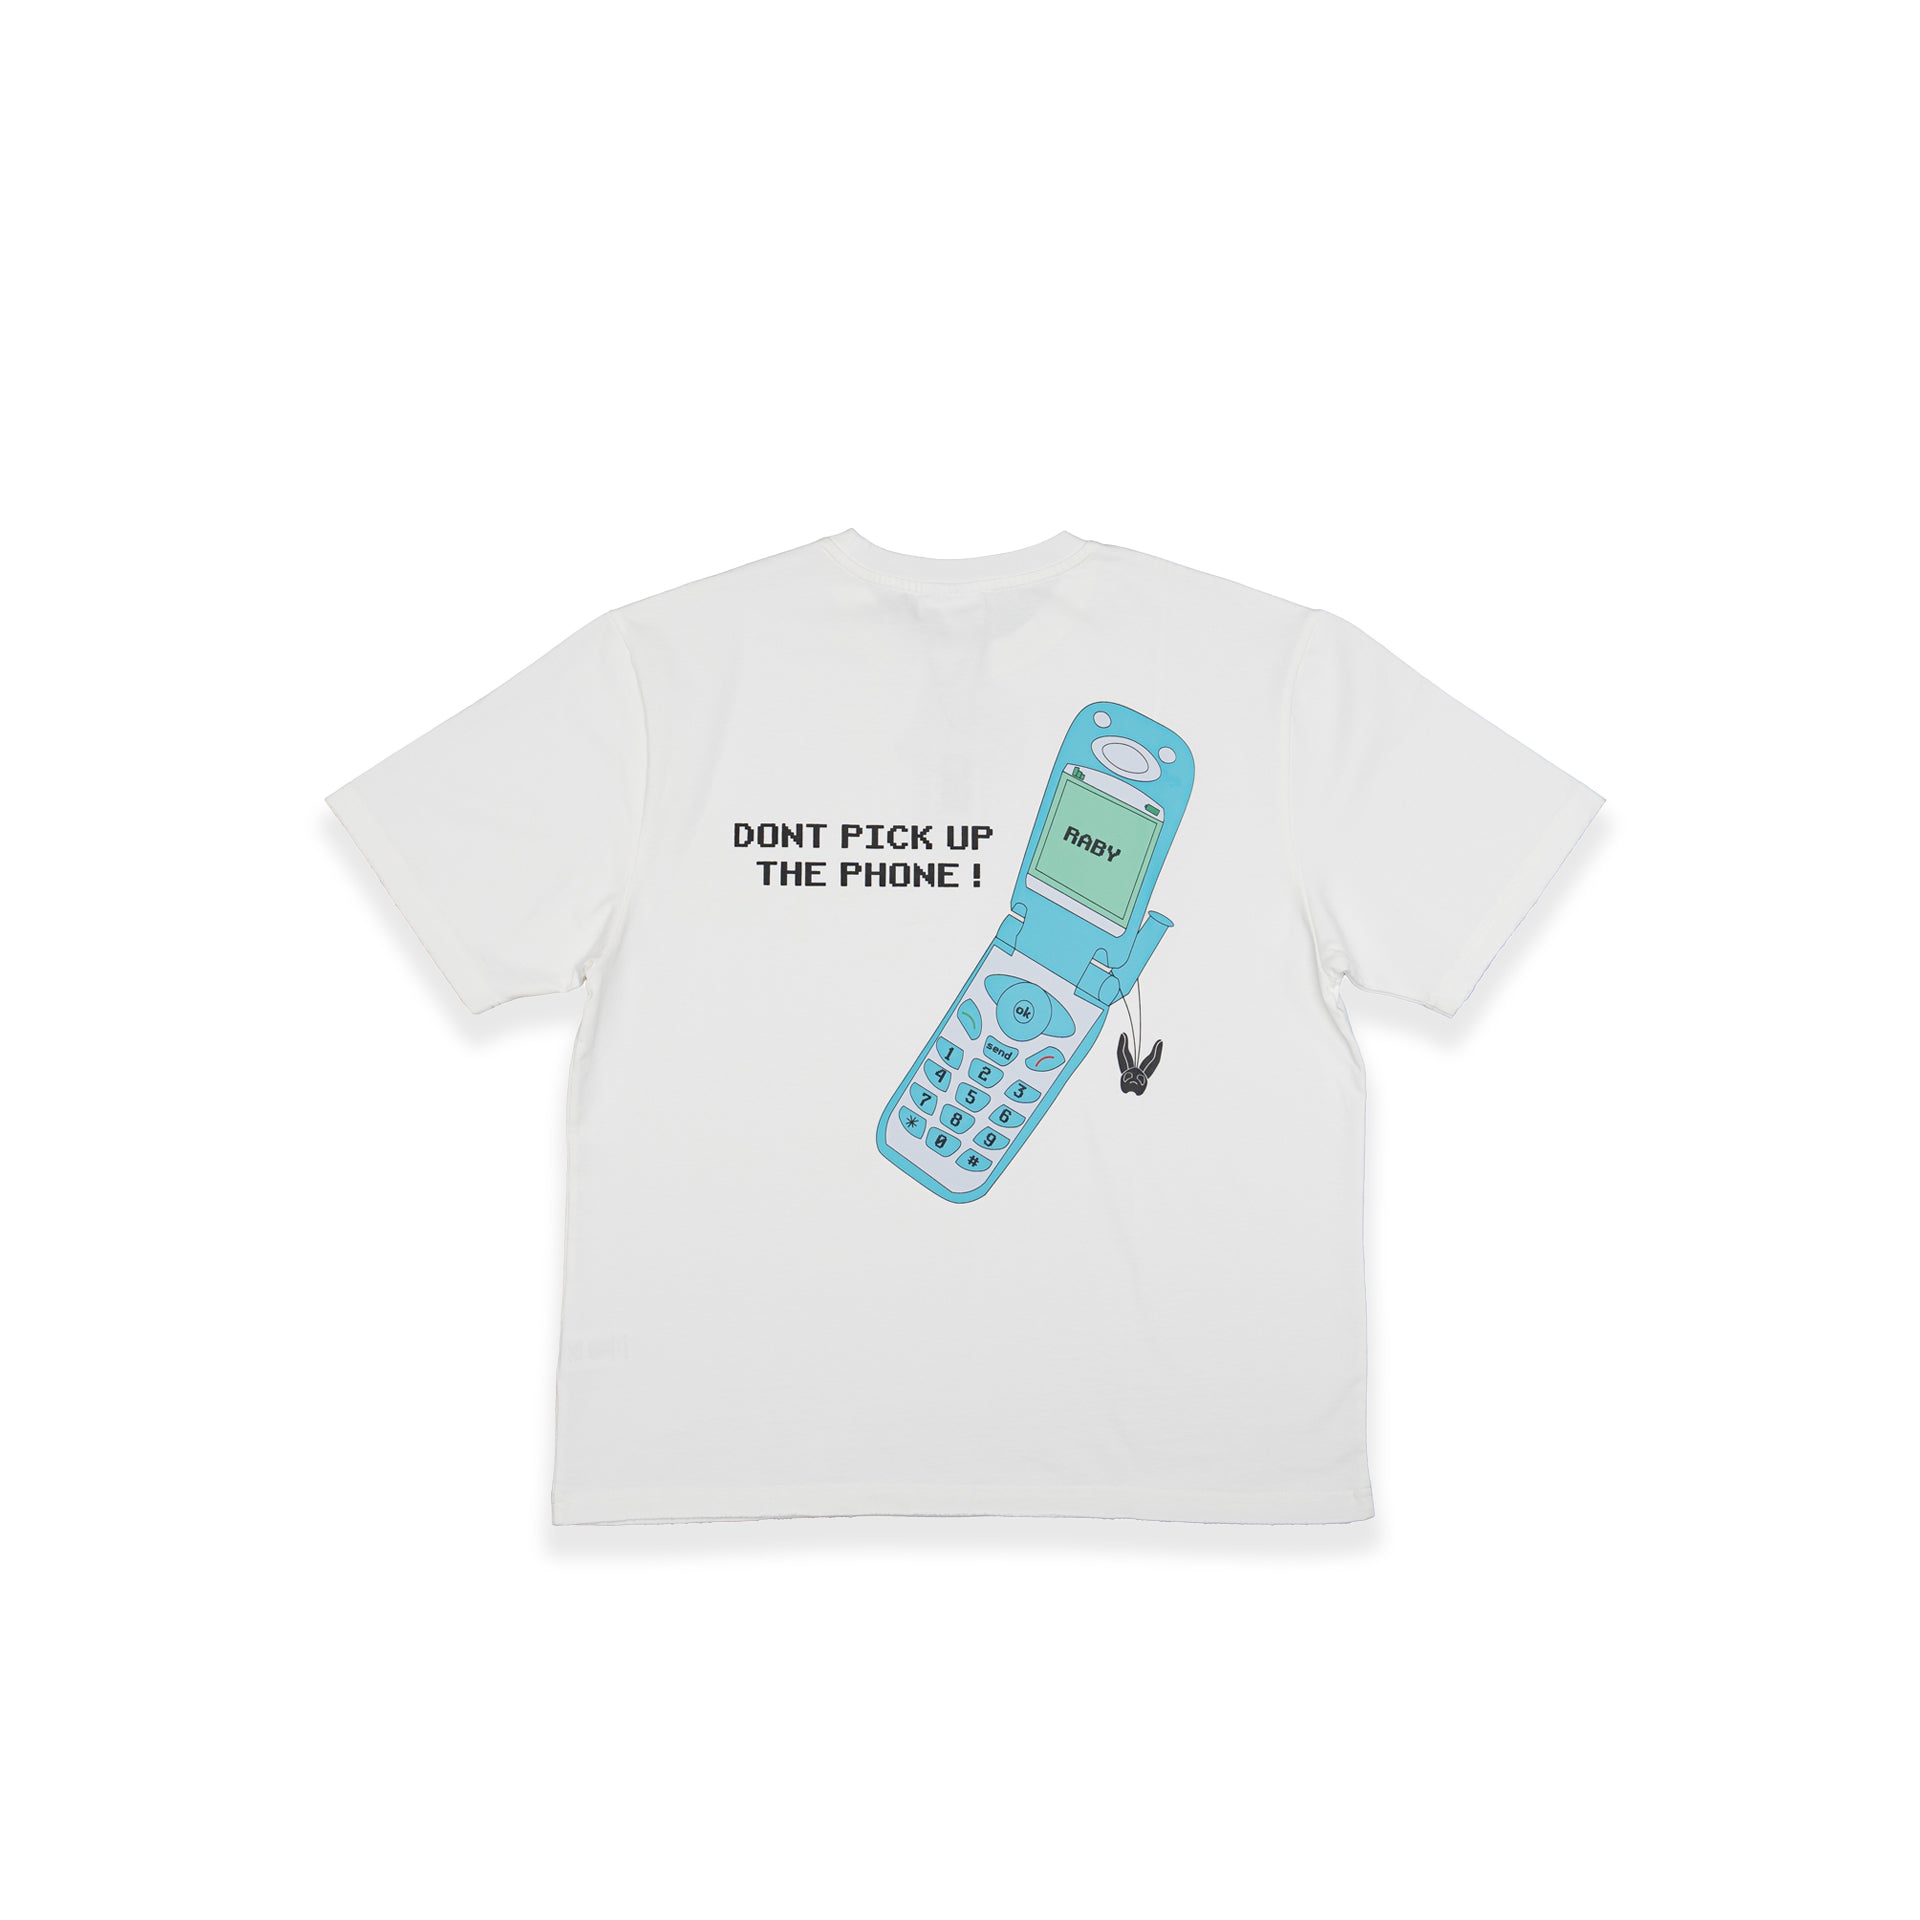 White T-shirt"The Phone" by Brandtionary